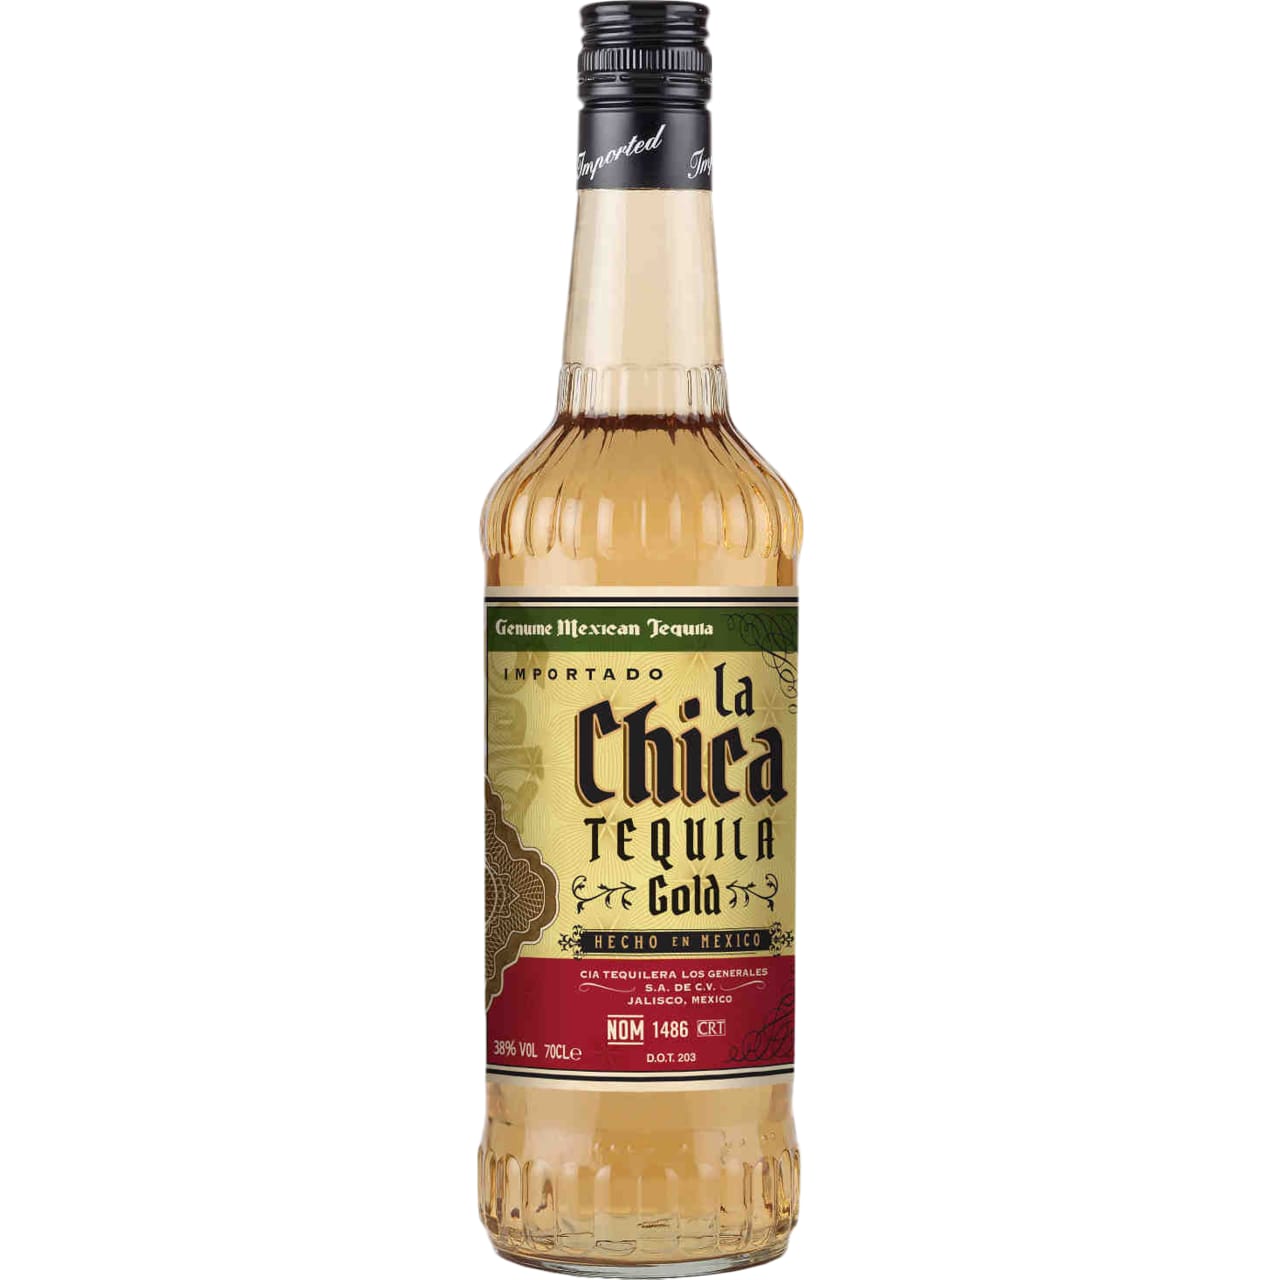 La Chica Tequila Gold is light gold in colour with notes of sweet caramelised, baked agave and a warm and mellow finish. A great value Reposado tequila that's best suited for cocktails like the Margarita.